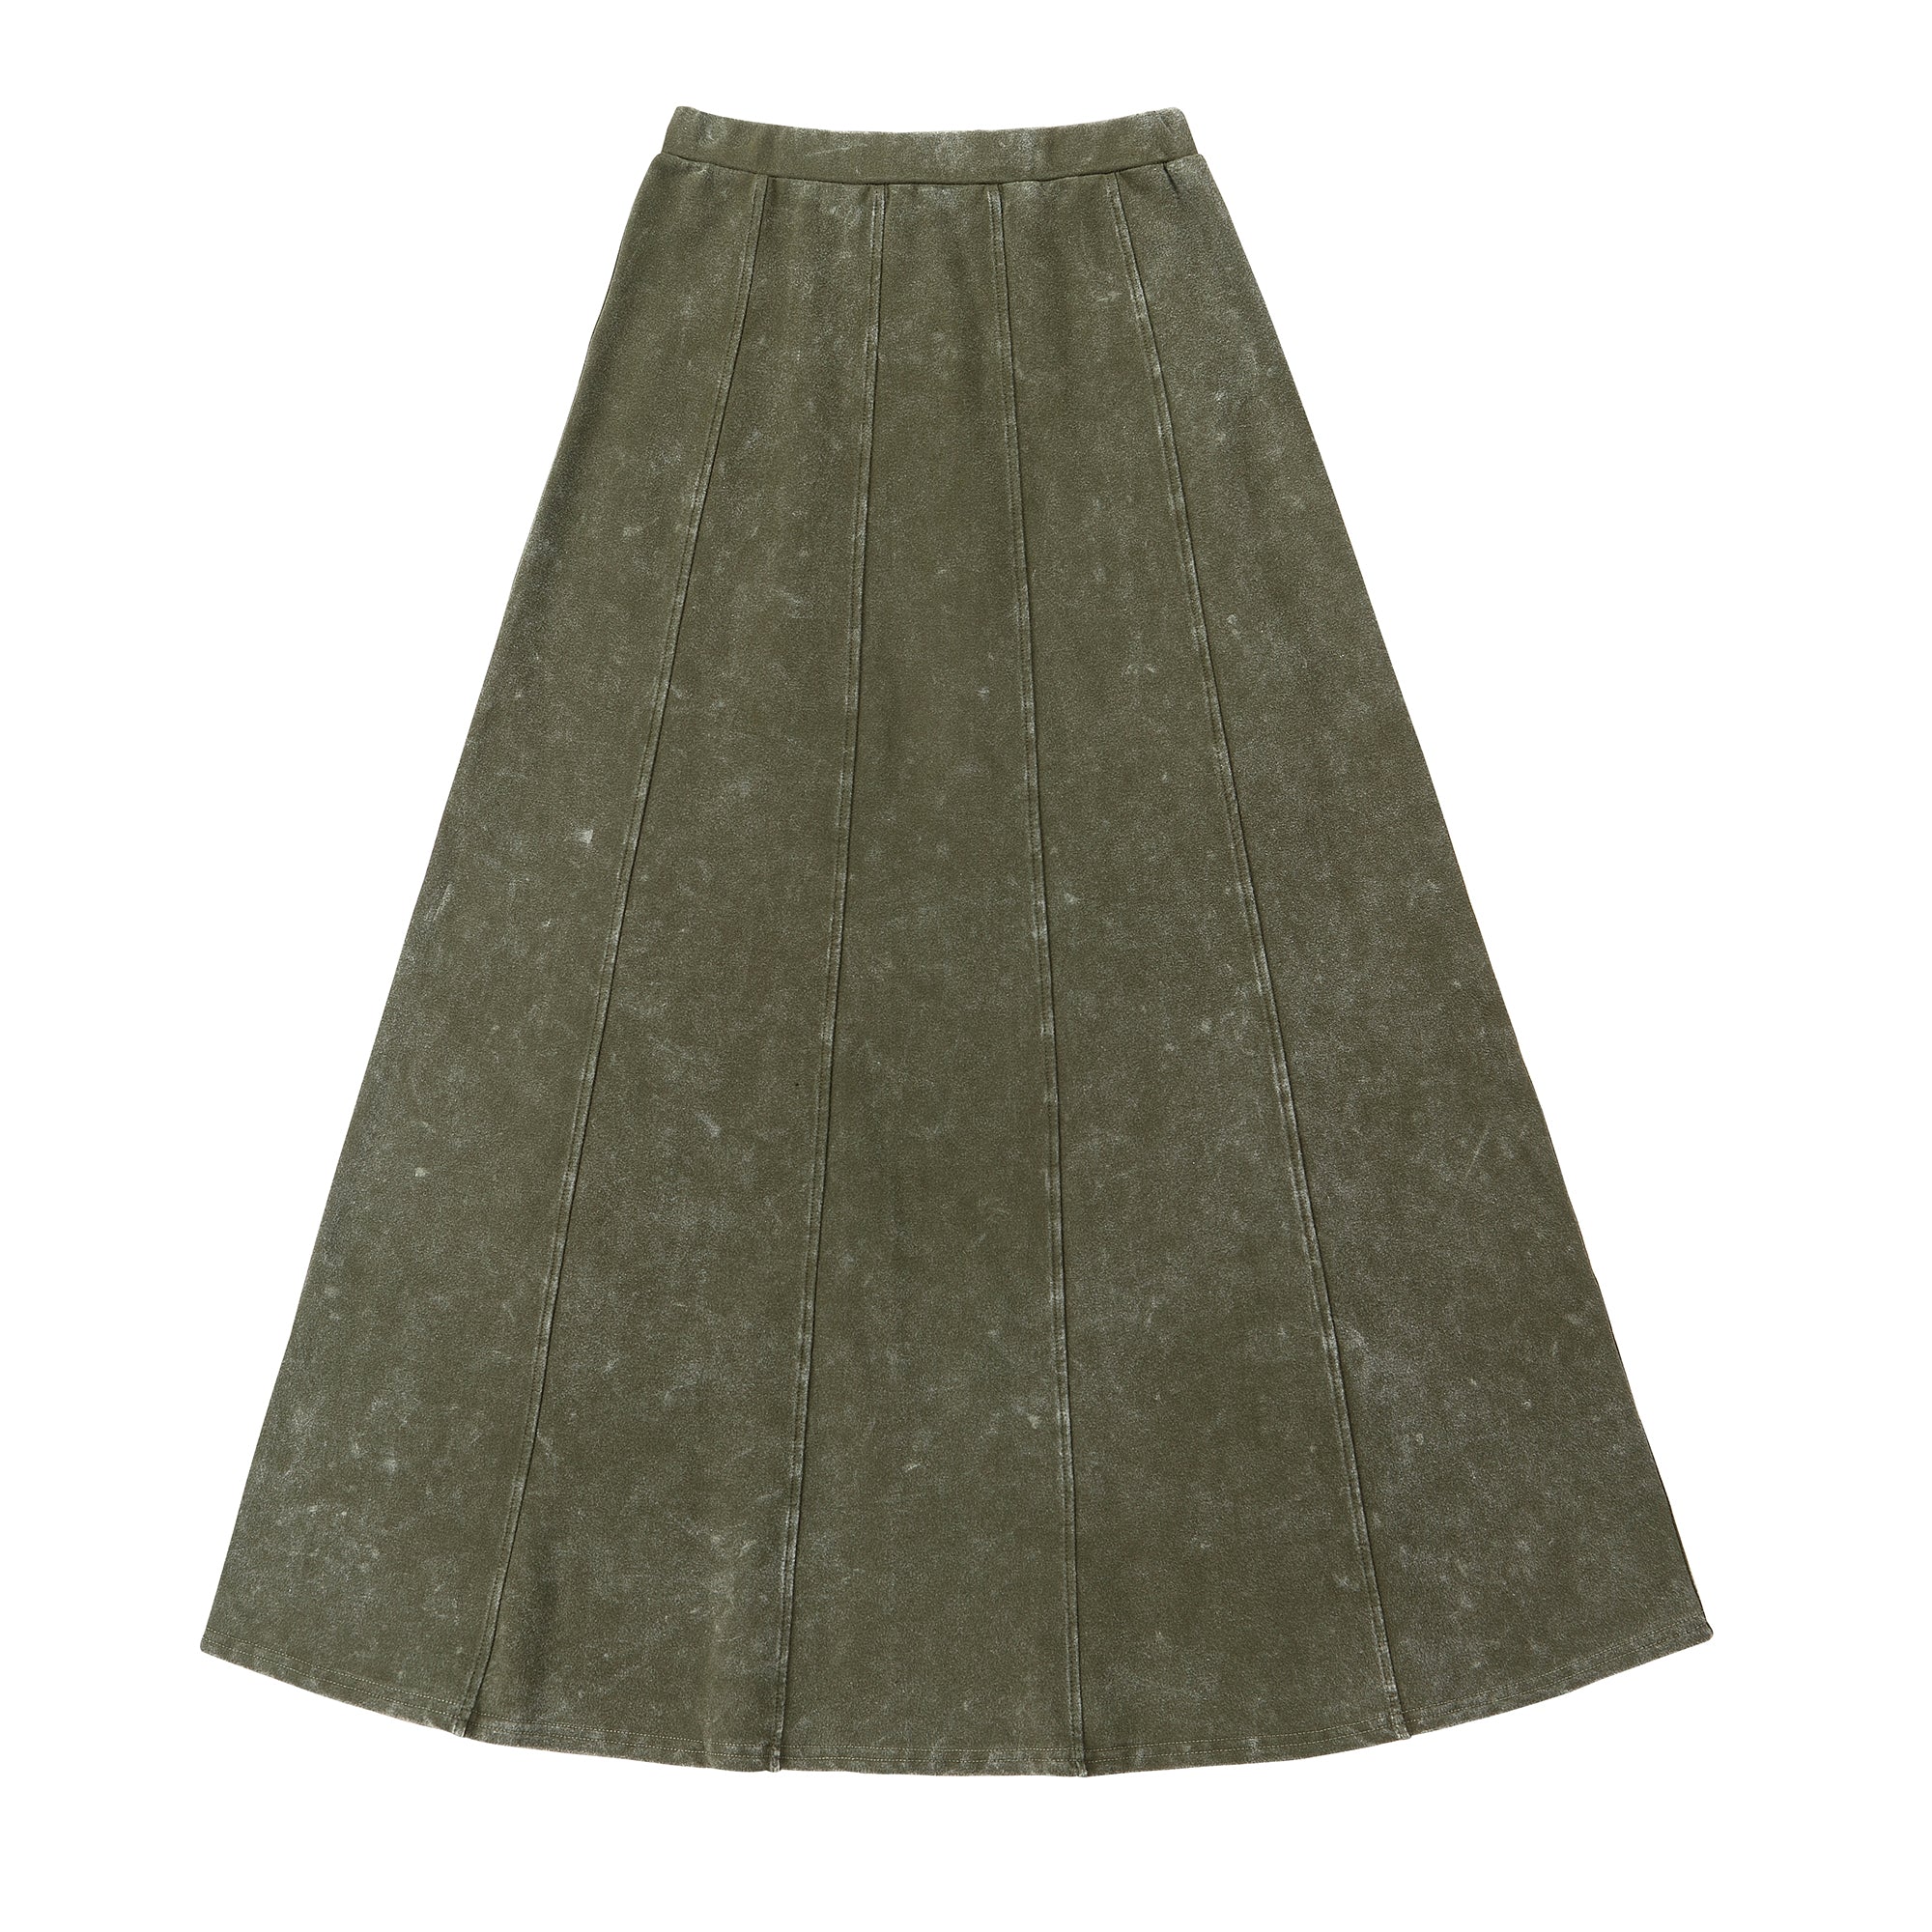 Green Wash Maxi Skirt With Stitching Details